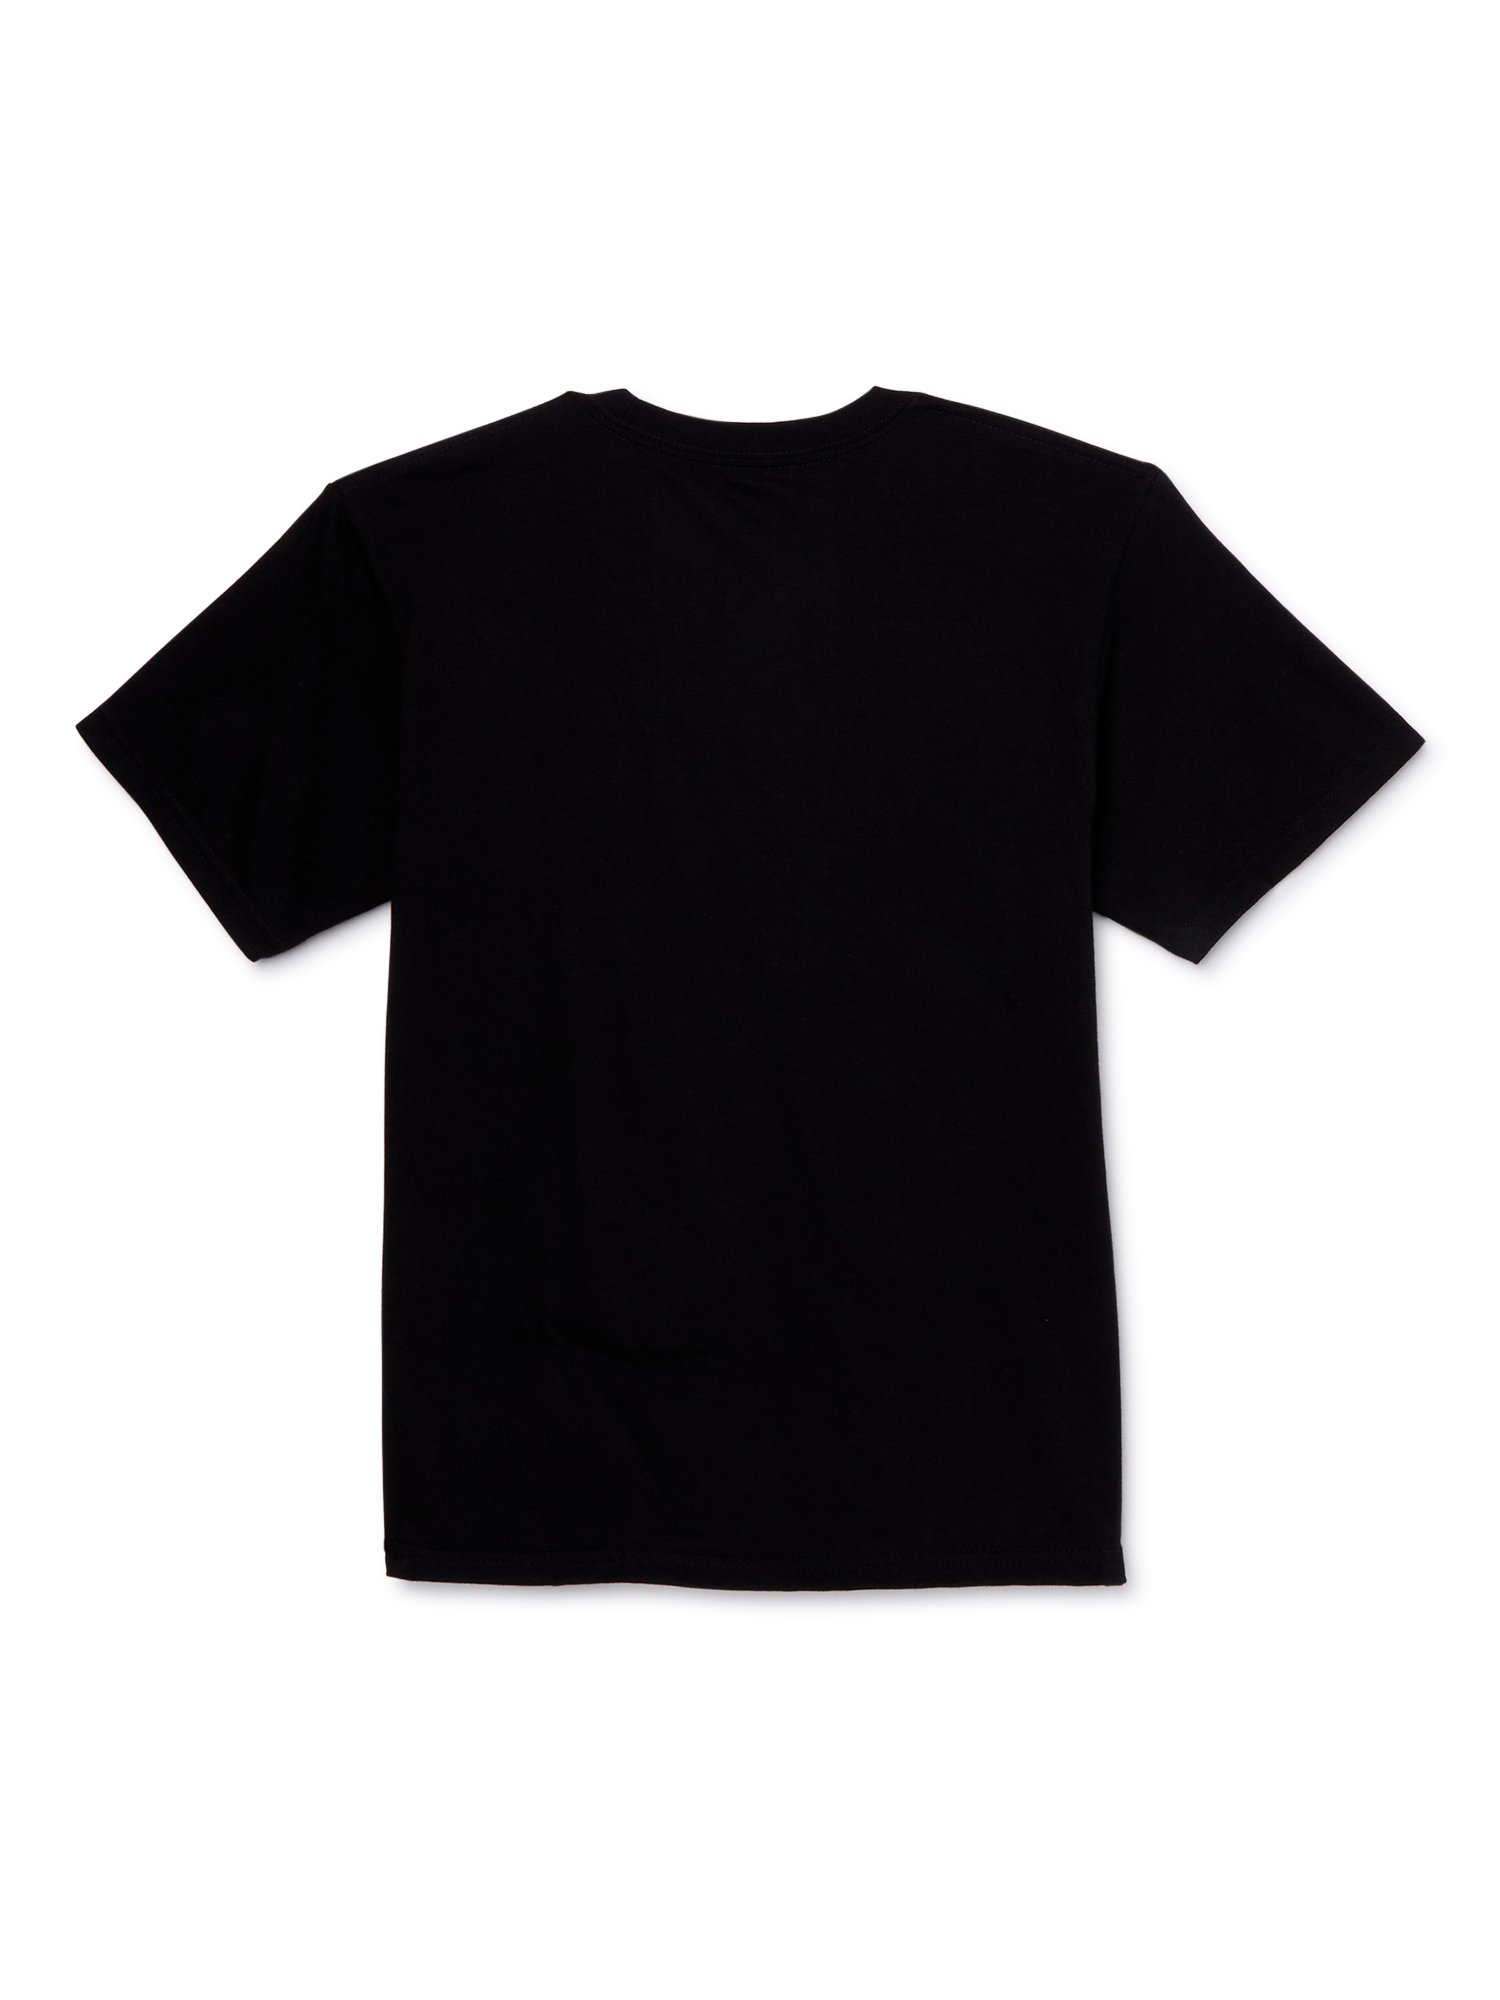 Ryan's World Short Sleeve Graphic Crew Neck Relaxed Fit T-Shirt (Little Boys or Big Boys) 2 Pack - image 2 of 6